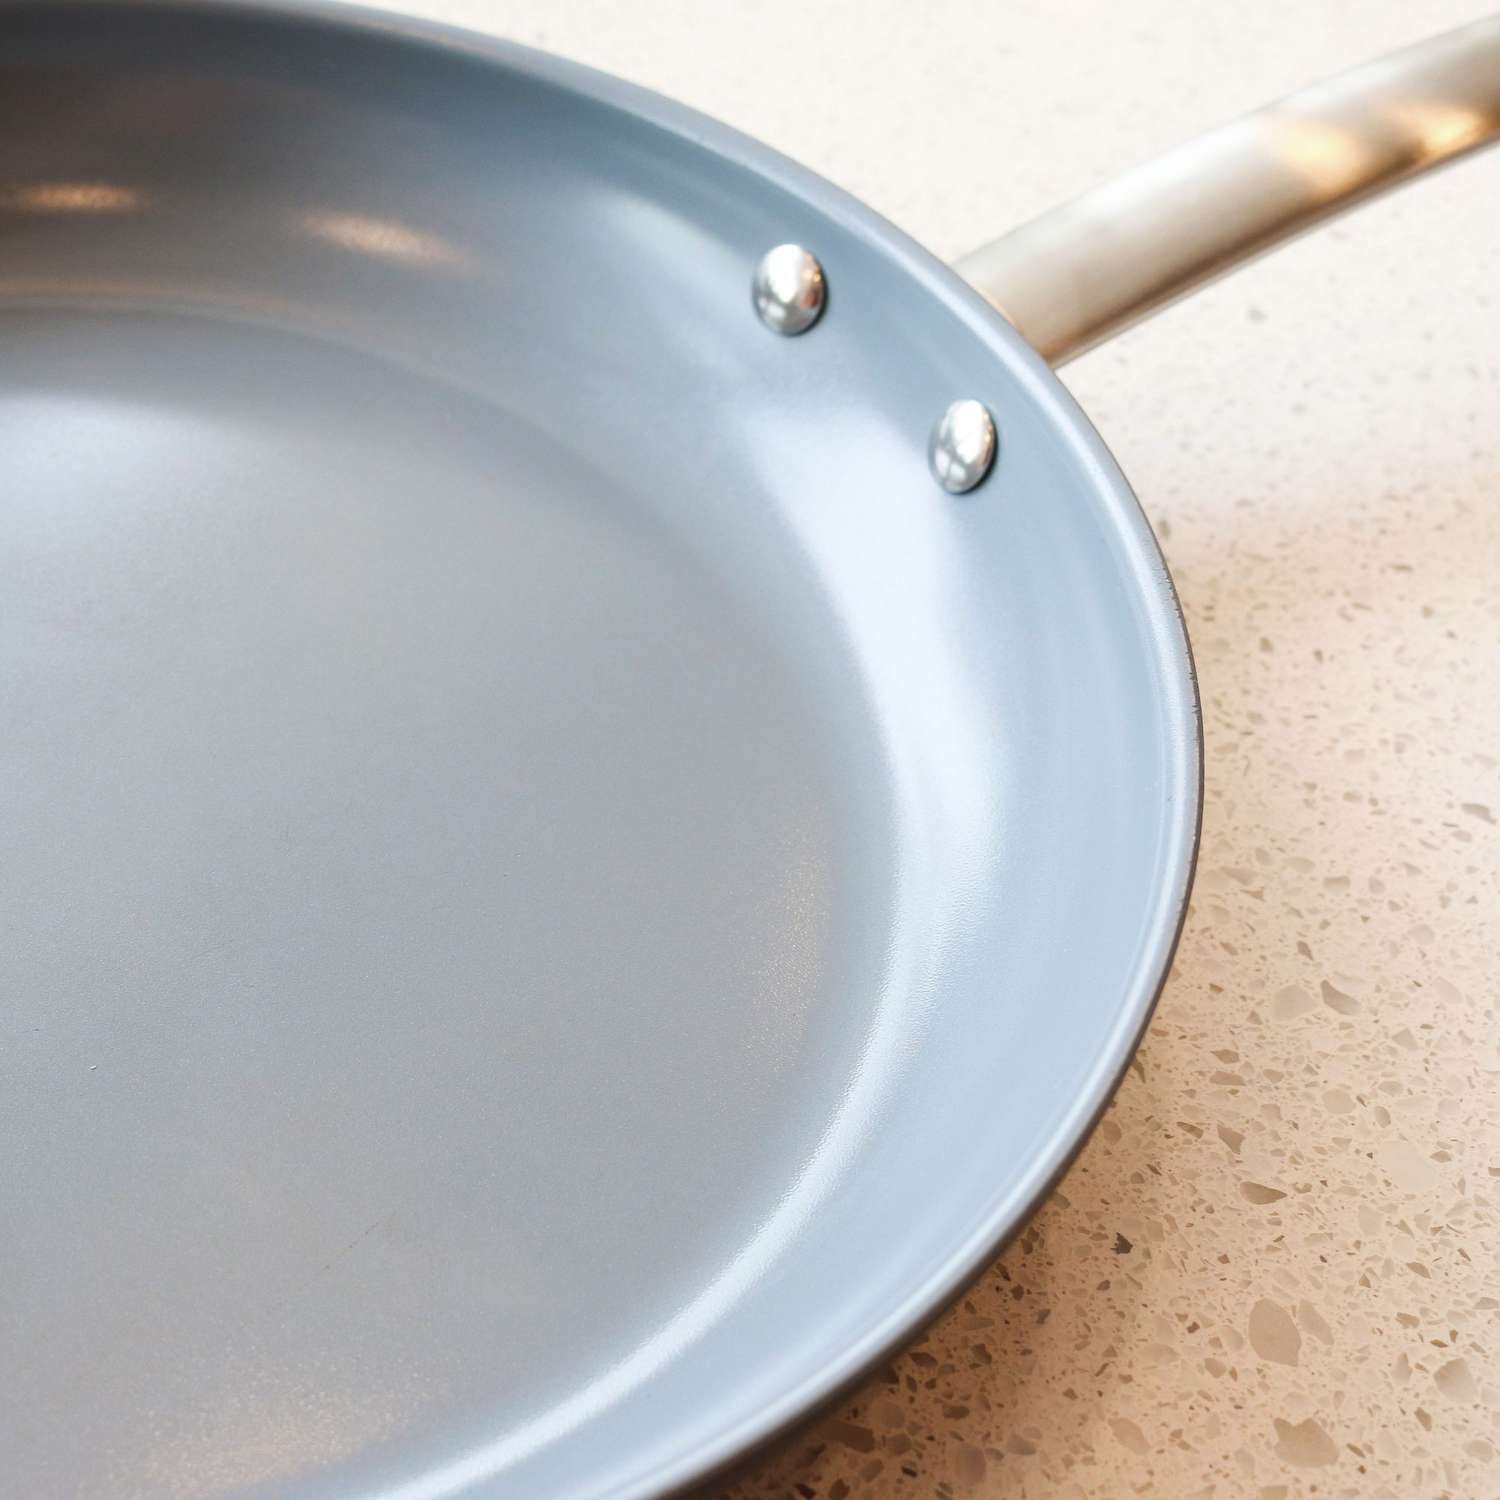 Nonstick Pans: How to Use, Clean, and Store Them | Martha Stewart